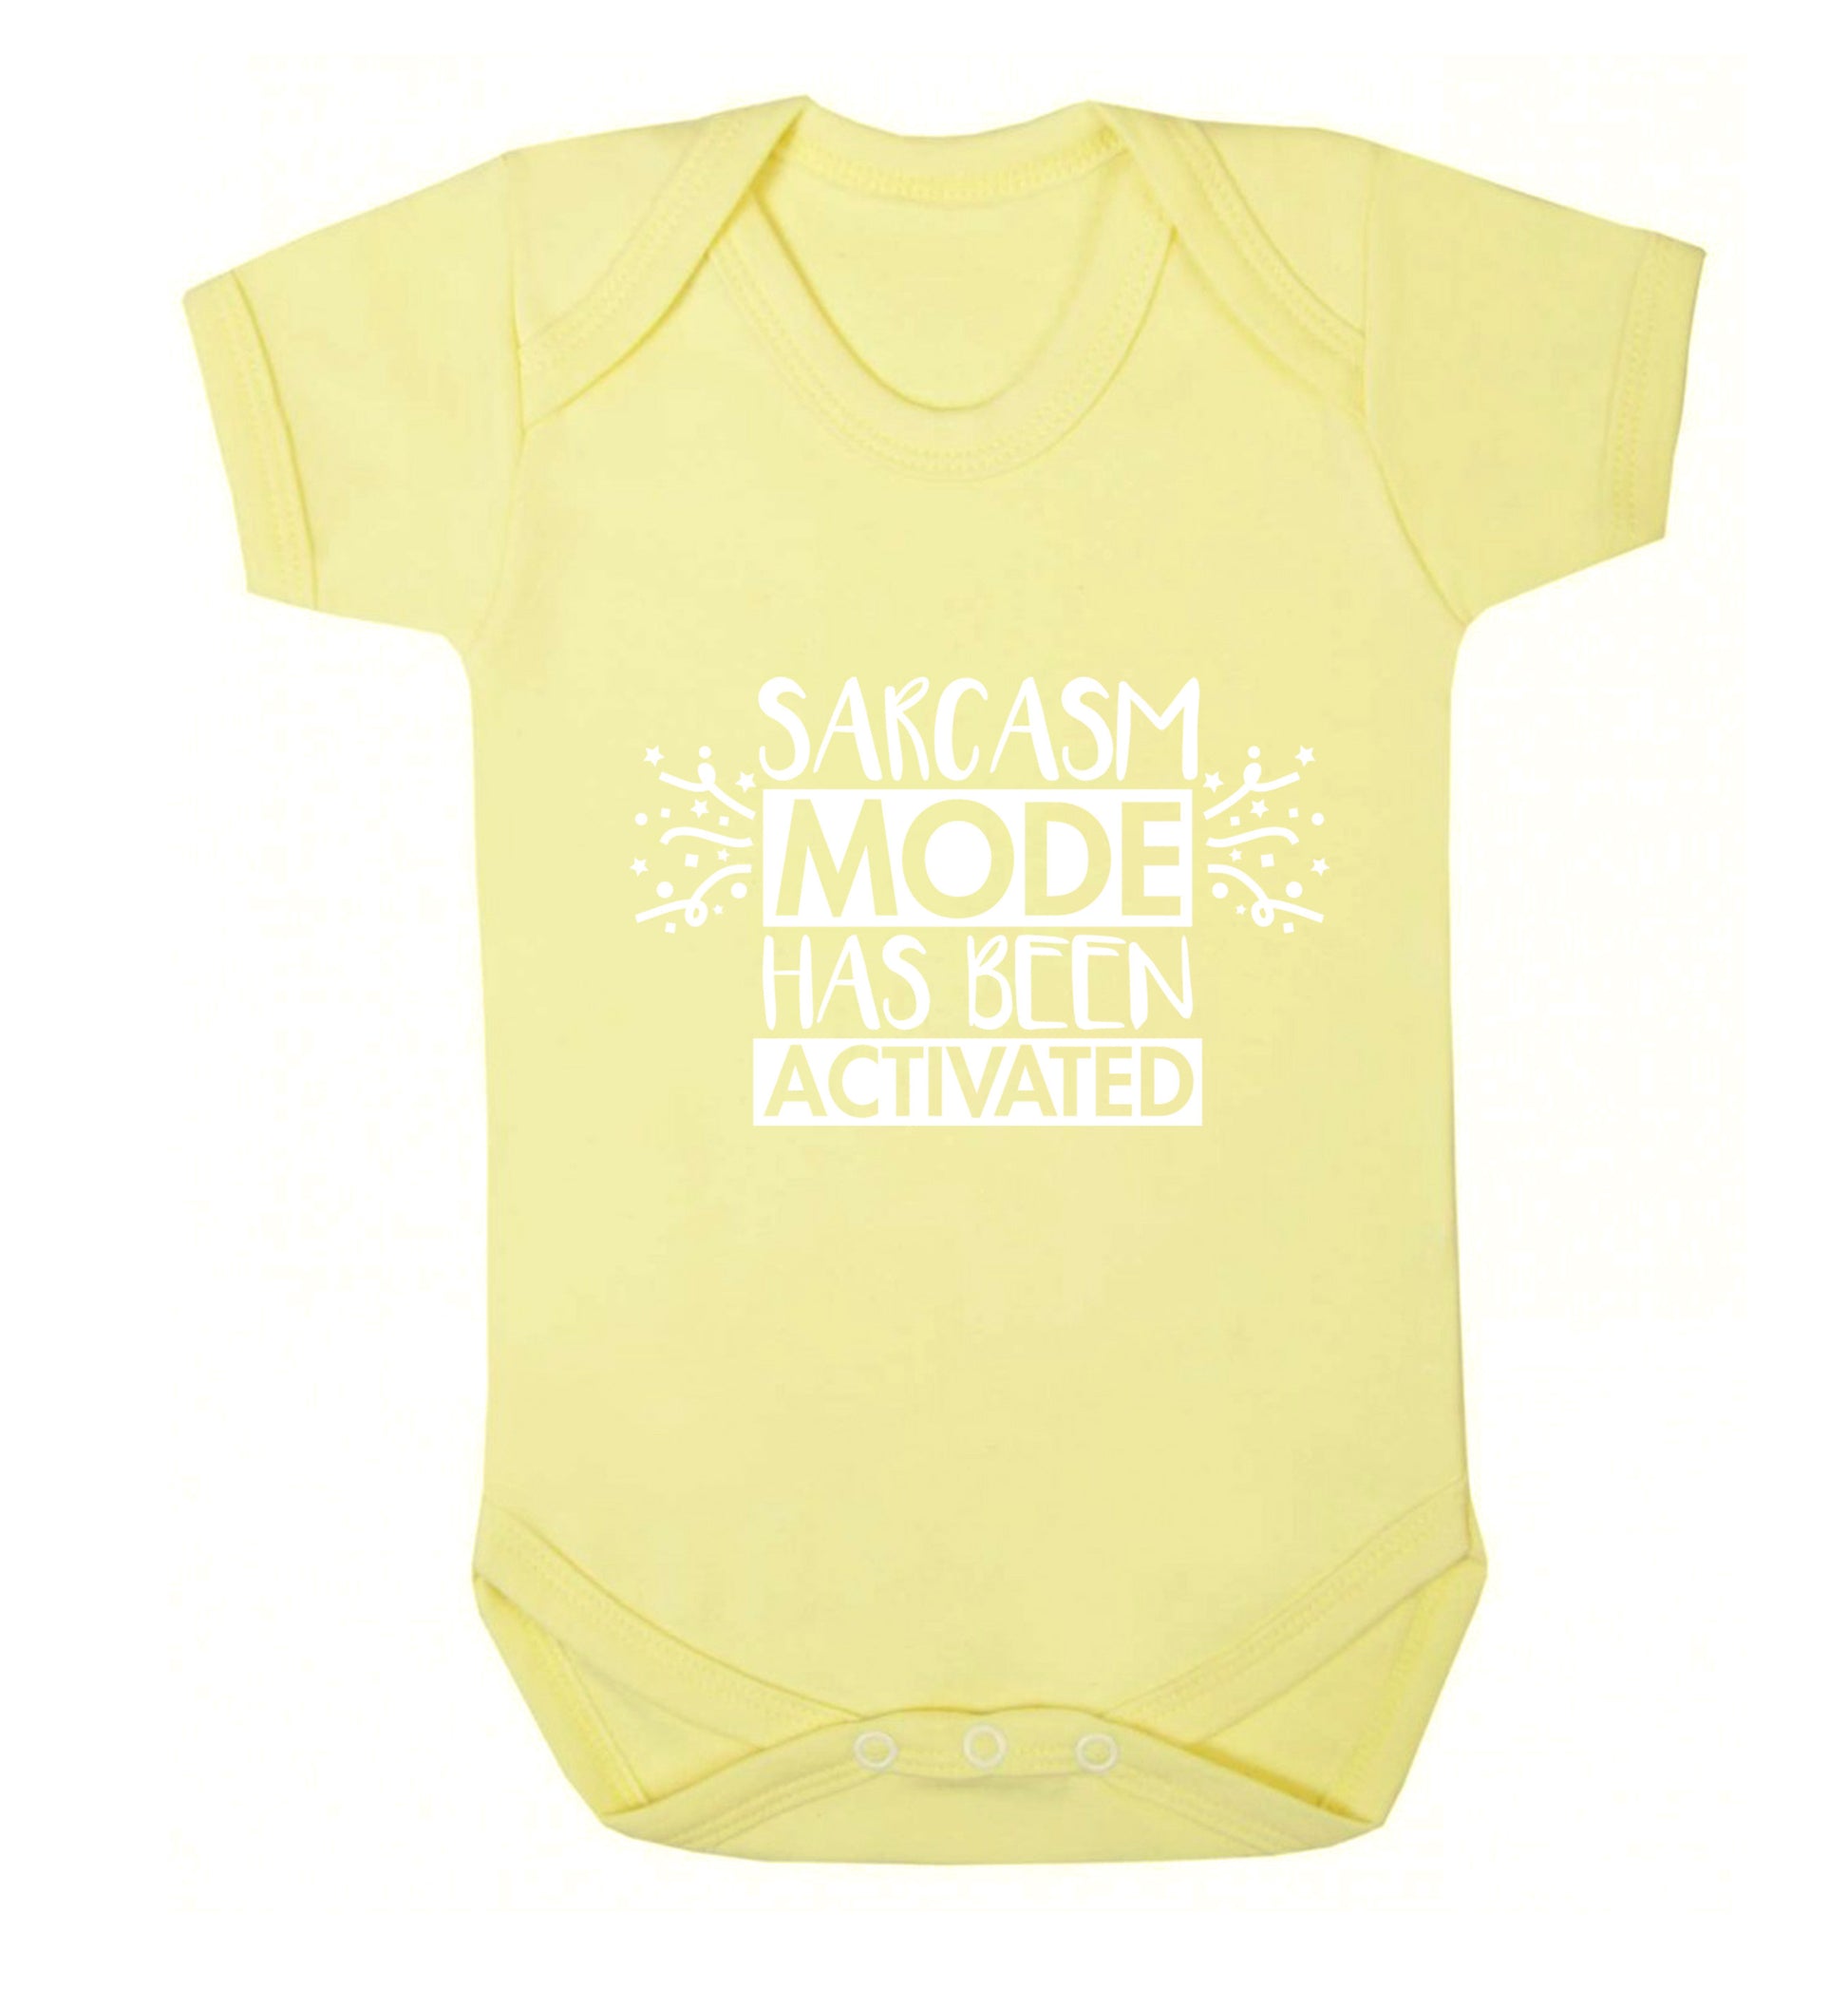 Sarcarsm mode has been activated Baby Vest pale yellow 18-24 months